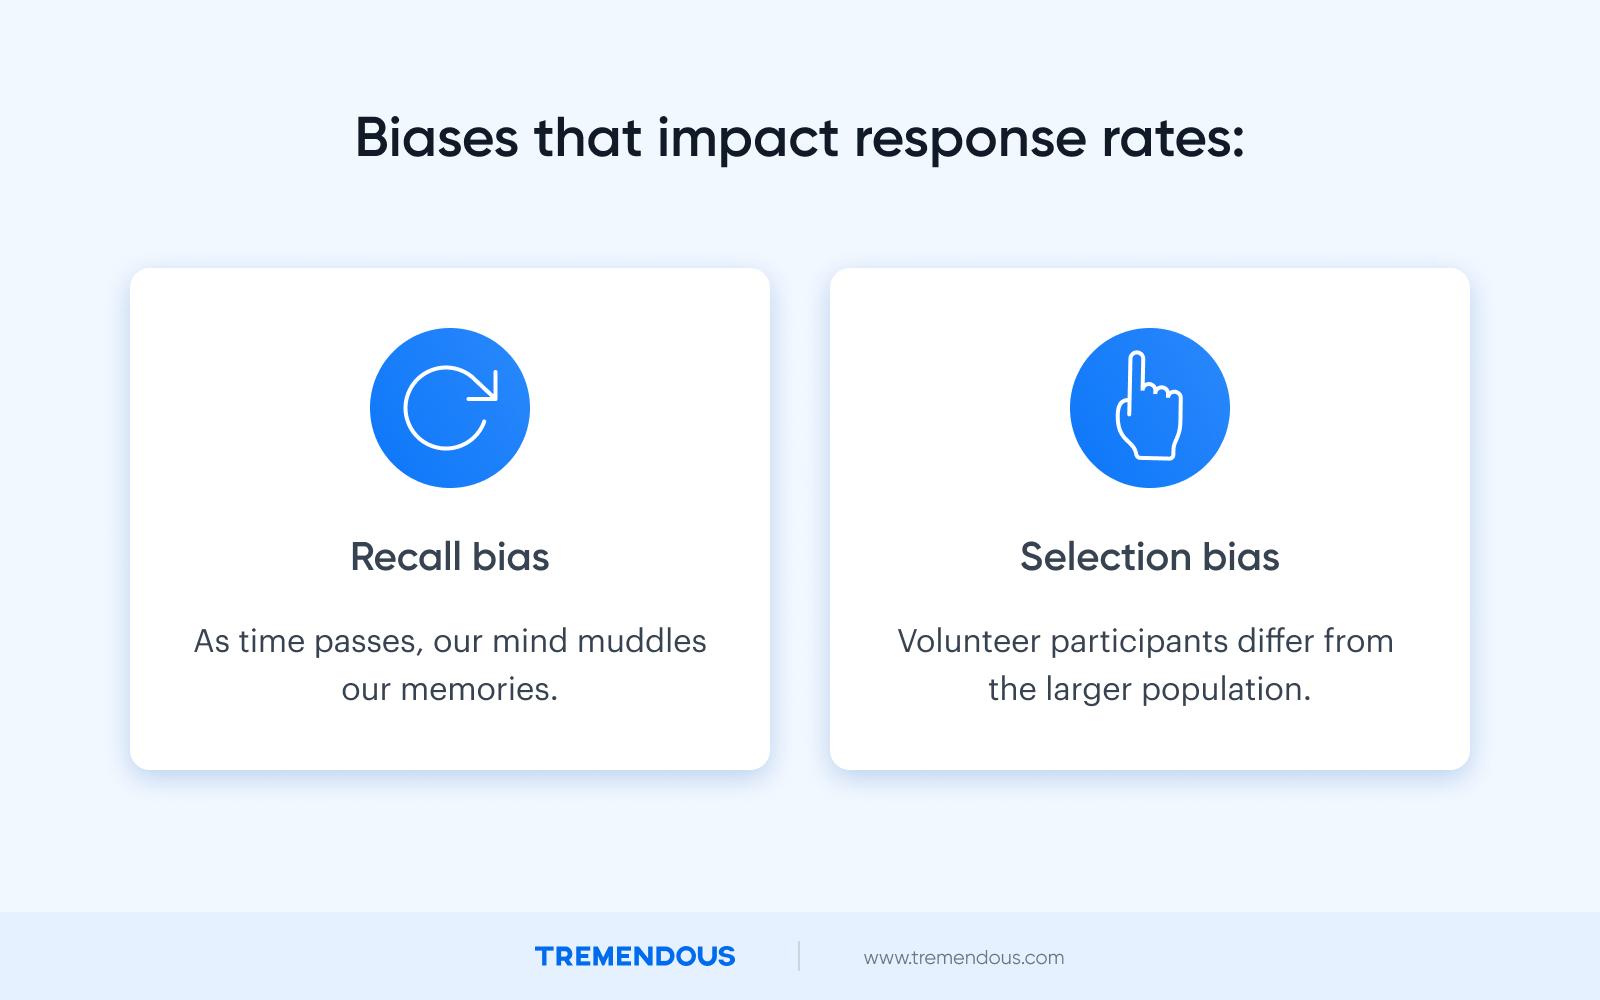 Text reads: "Biases that impact response rates." On the left, text reads: "Recall bias: As time passes, our mind muddles our memories." On the right, text reads: "Selection bias: Volunteer participants differ from the larger population."